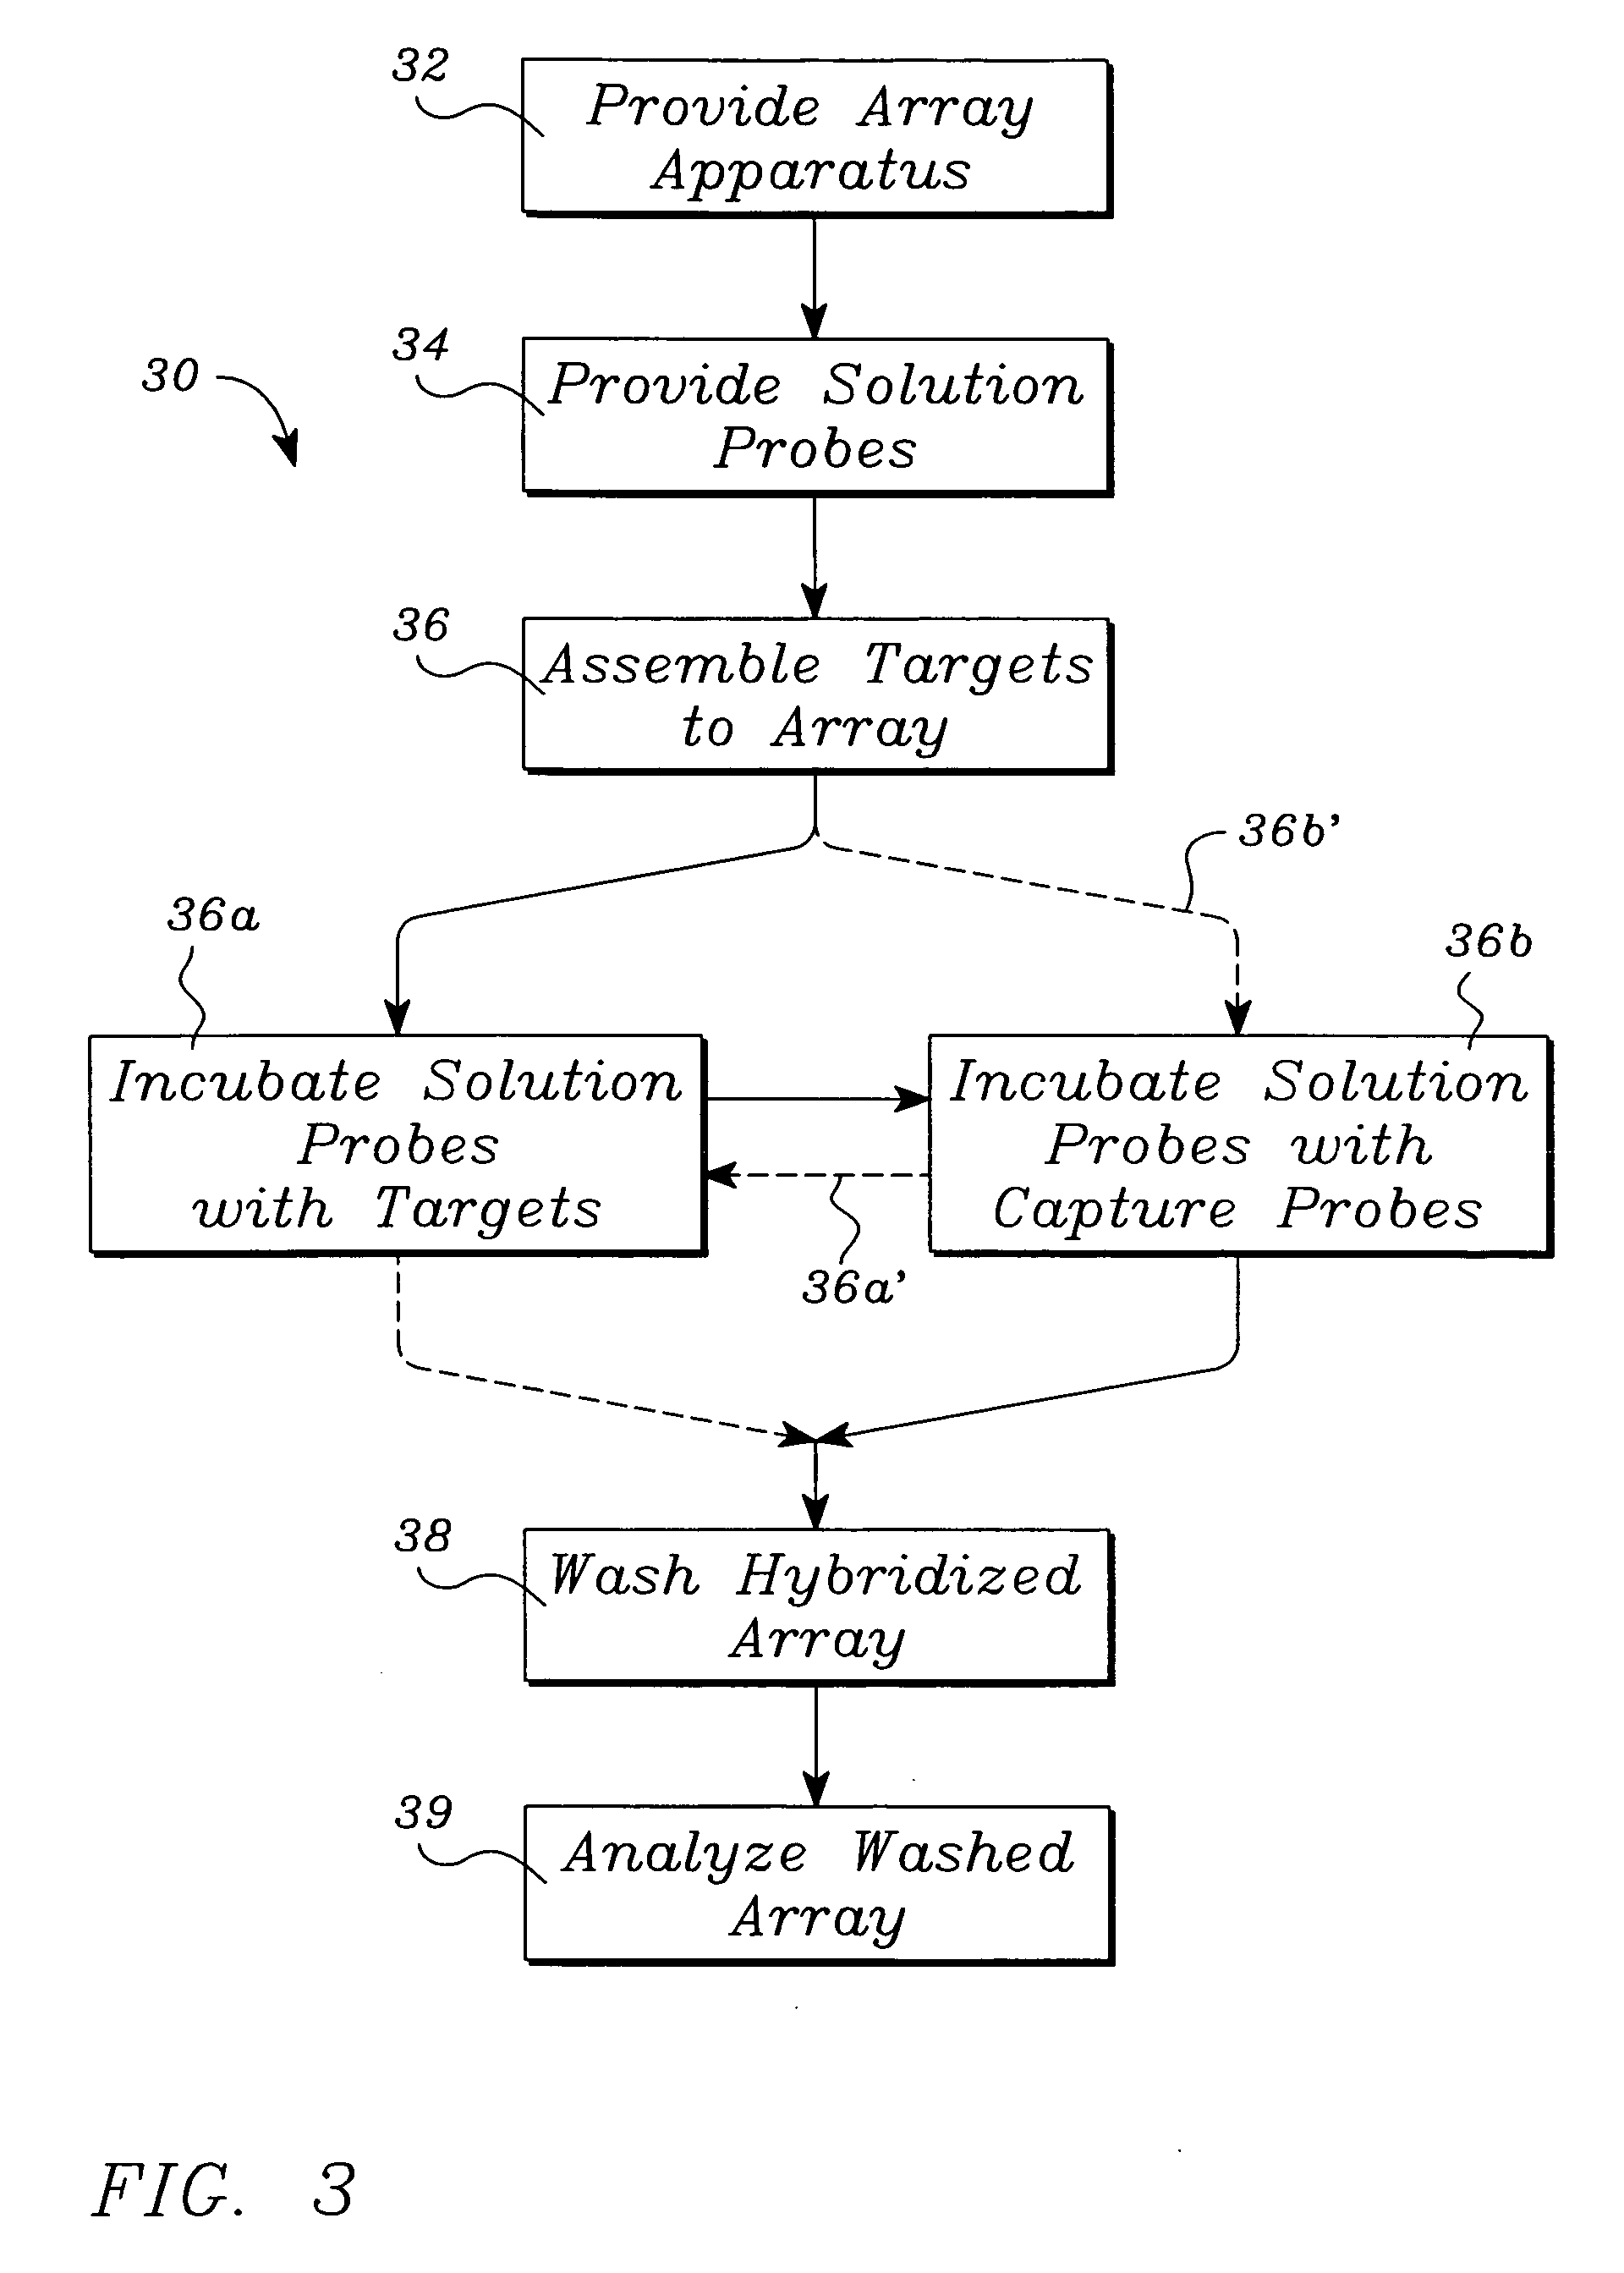 Systems, tools and methods of assaying biological materials using spatially-addressable arrays